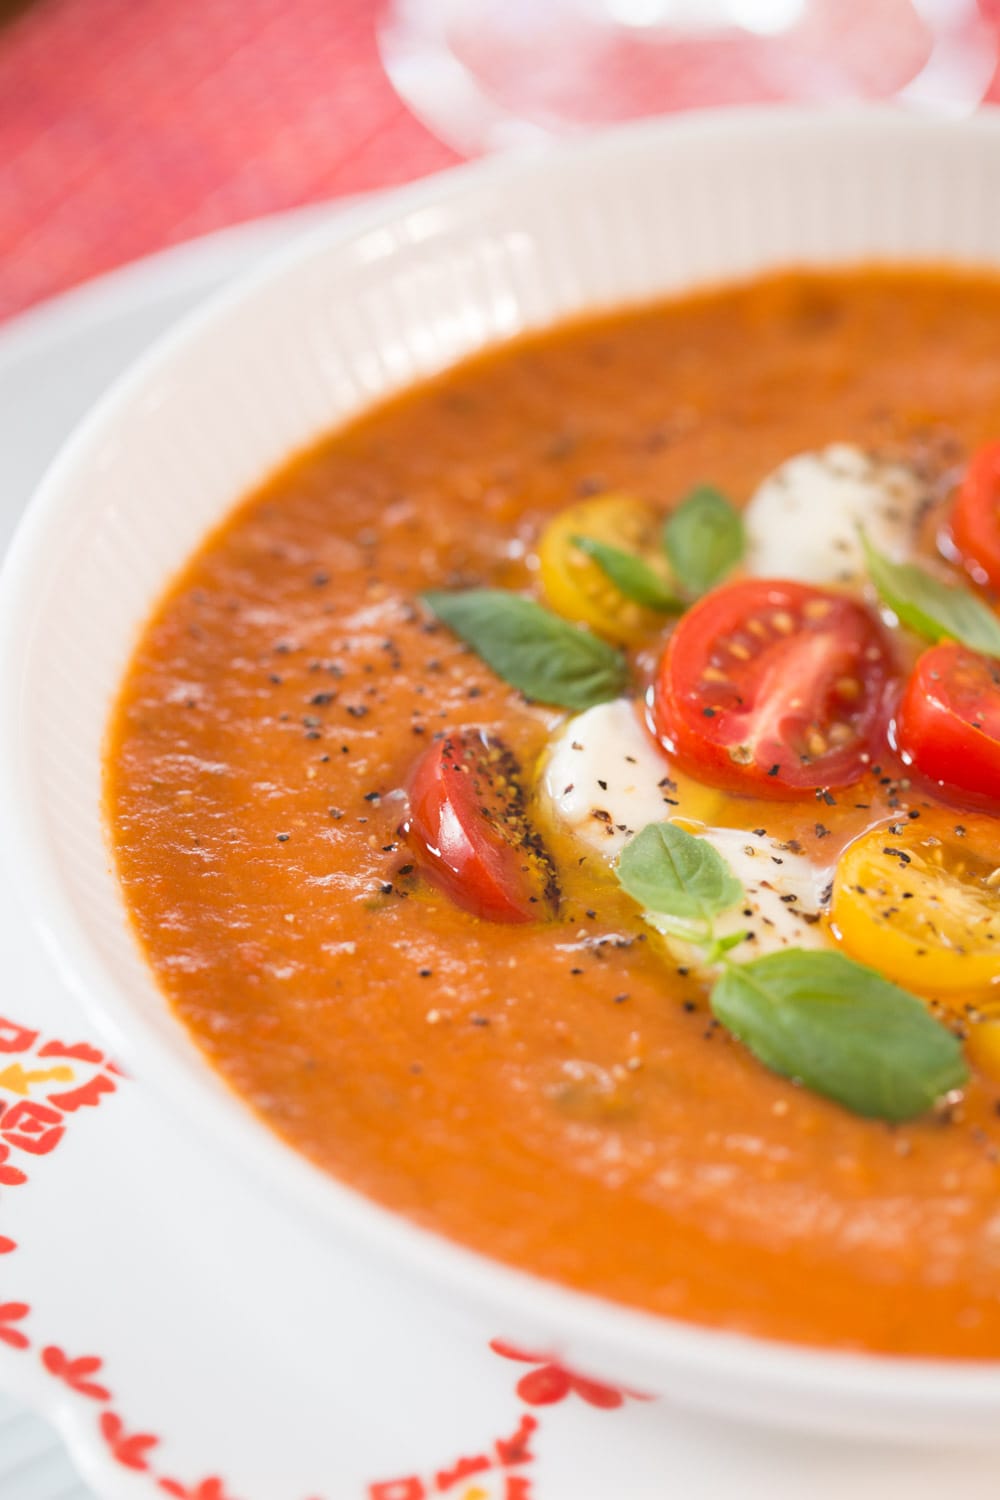 Roasted Tomato Lentil Soup Caprese -with classic tomato-basil flavor, this healthy, unique soup has a delicious Caprese topping.